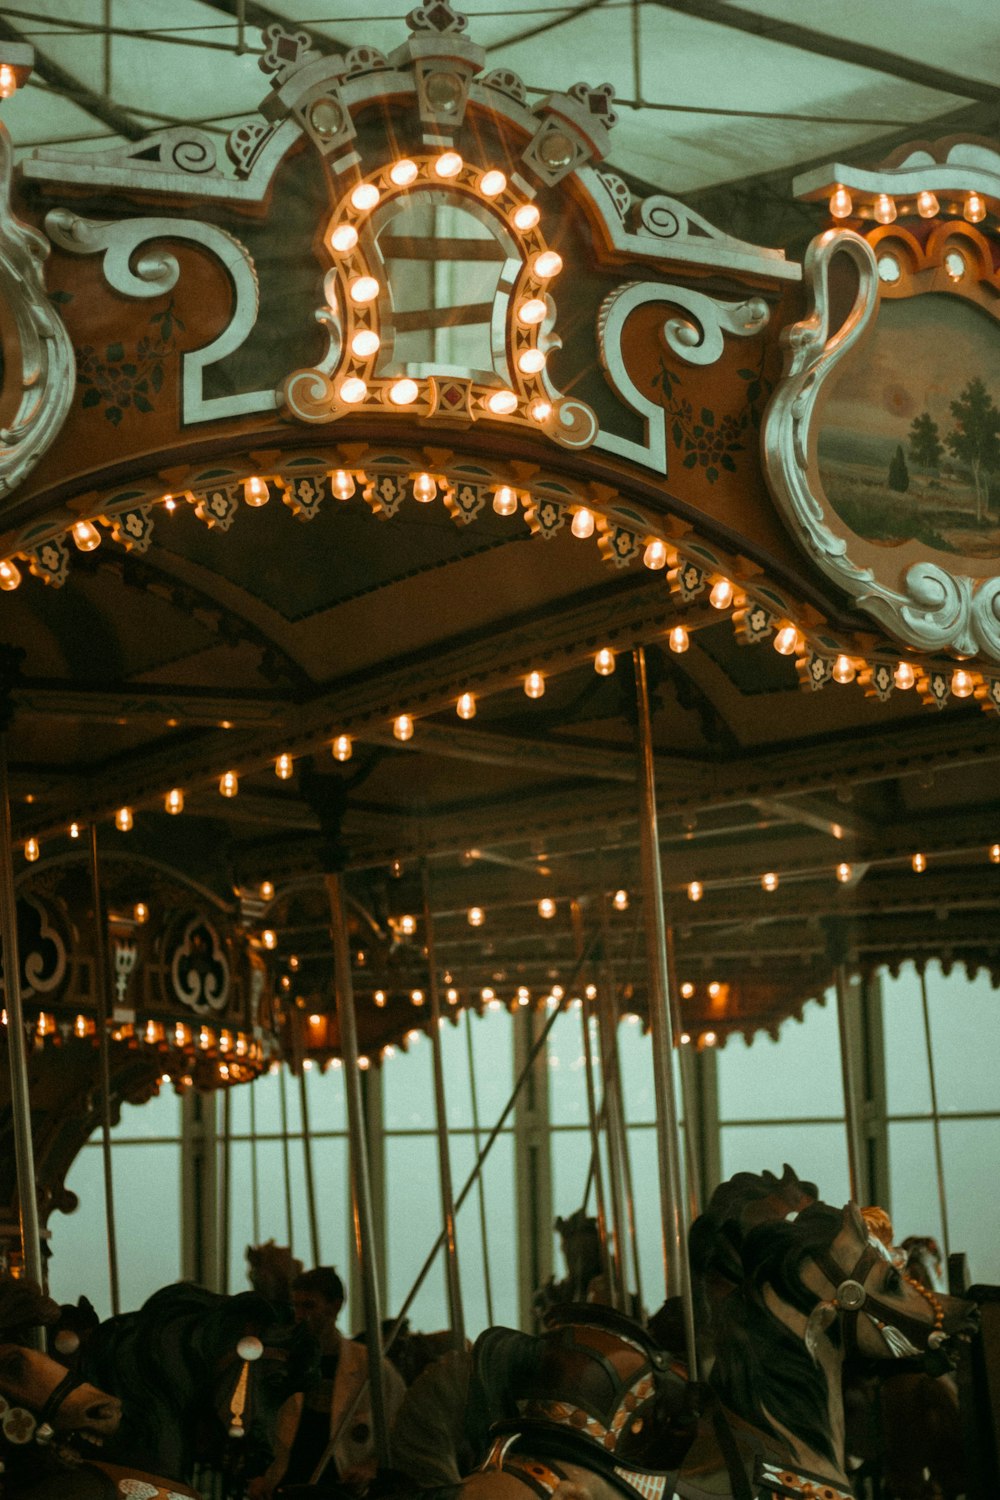 white and brown carousel with people